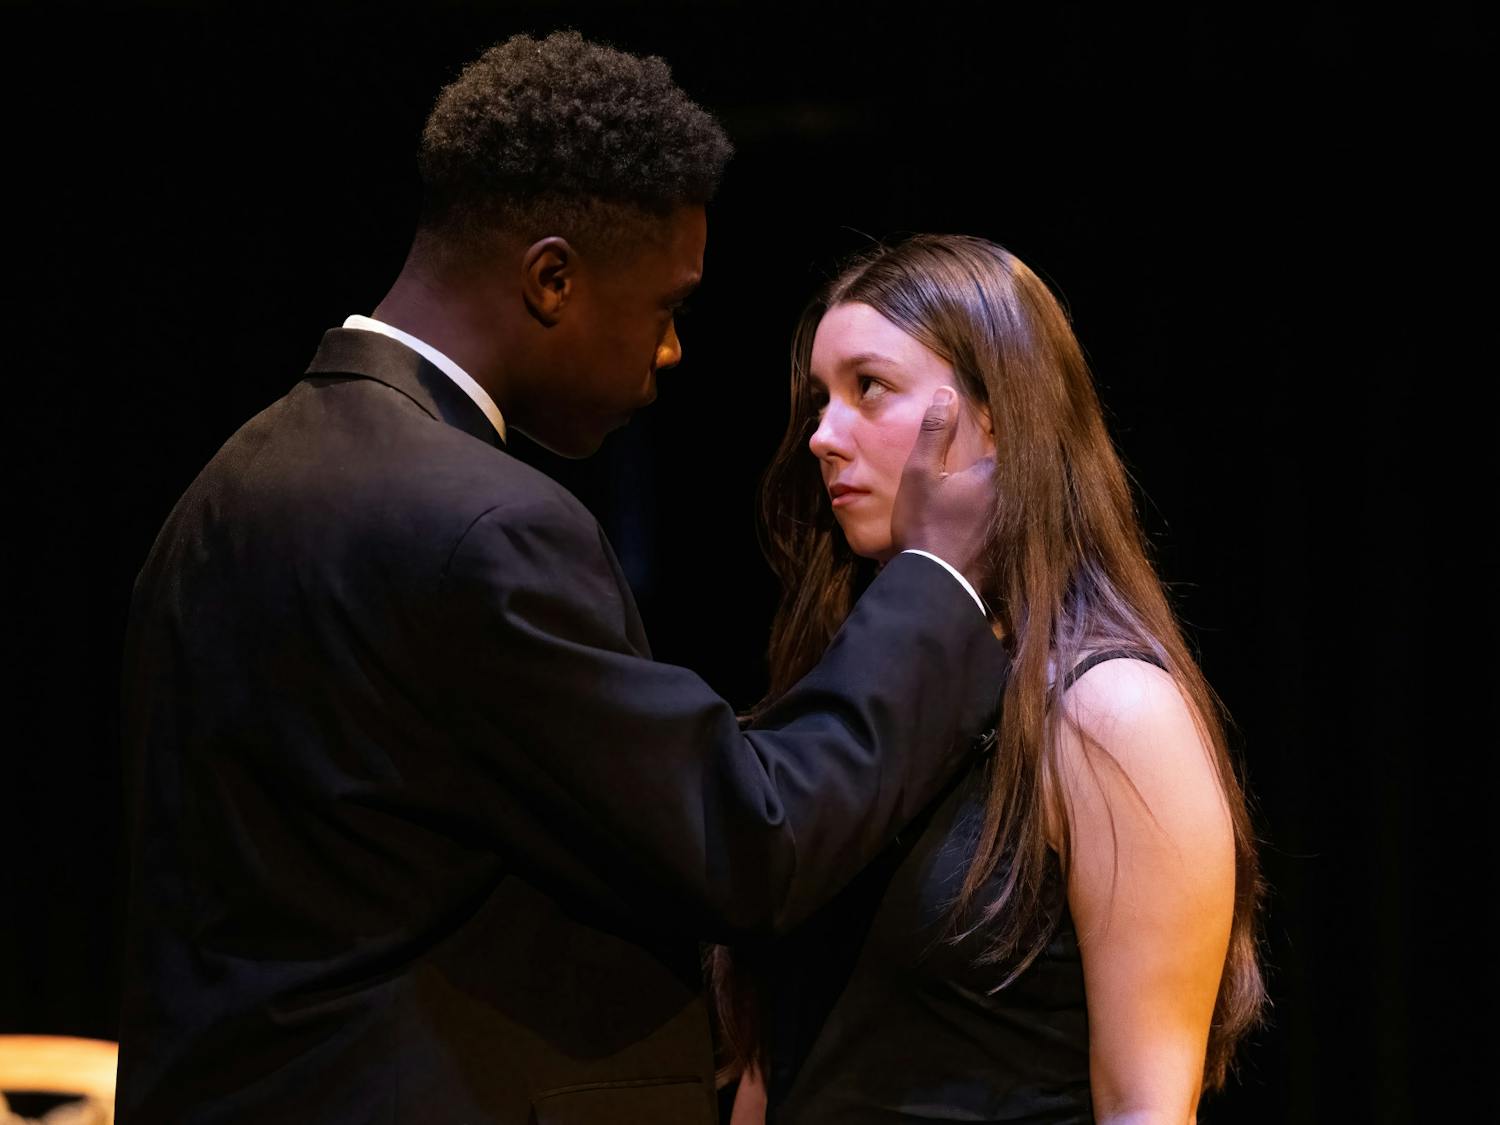 Brandan Booker and Alissa di Cristo played the only two roles in the student-directed play "Gruesome Playground Injuries."